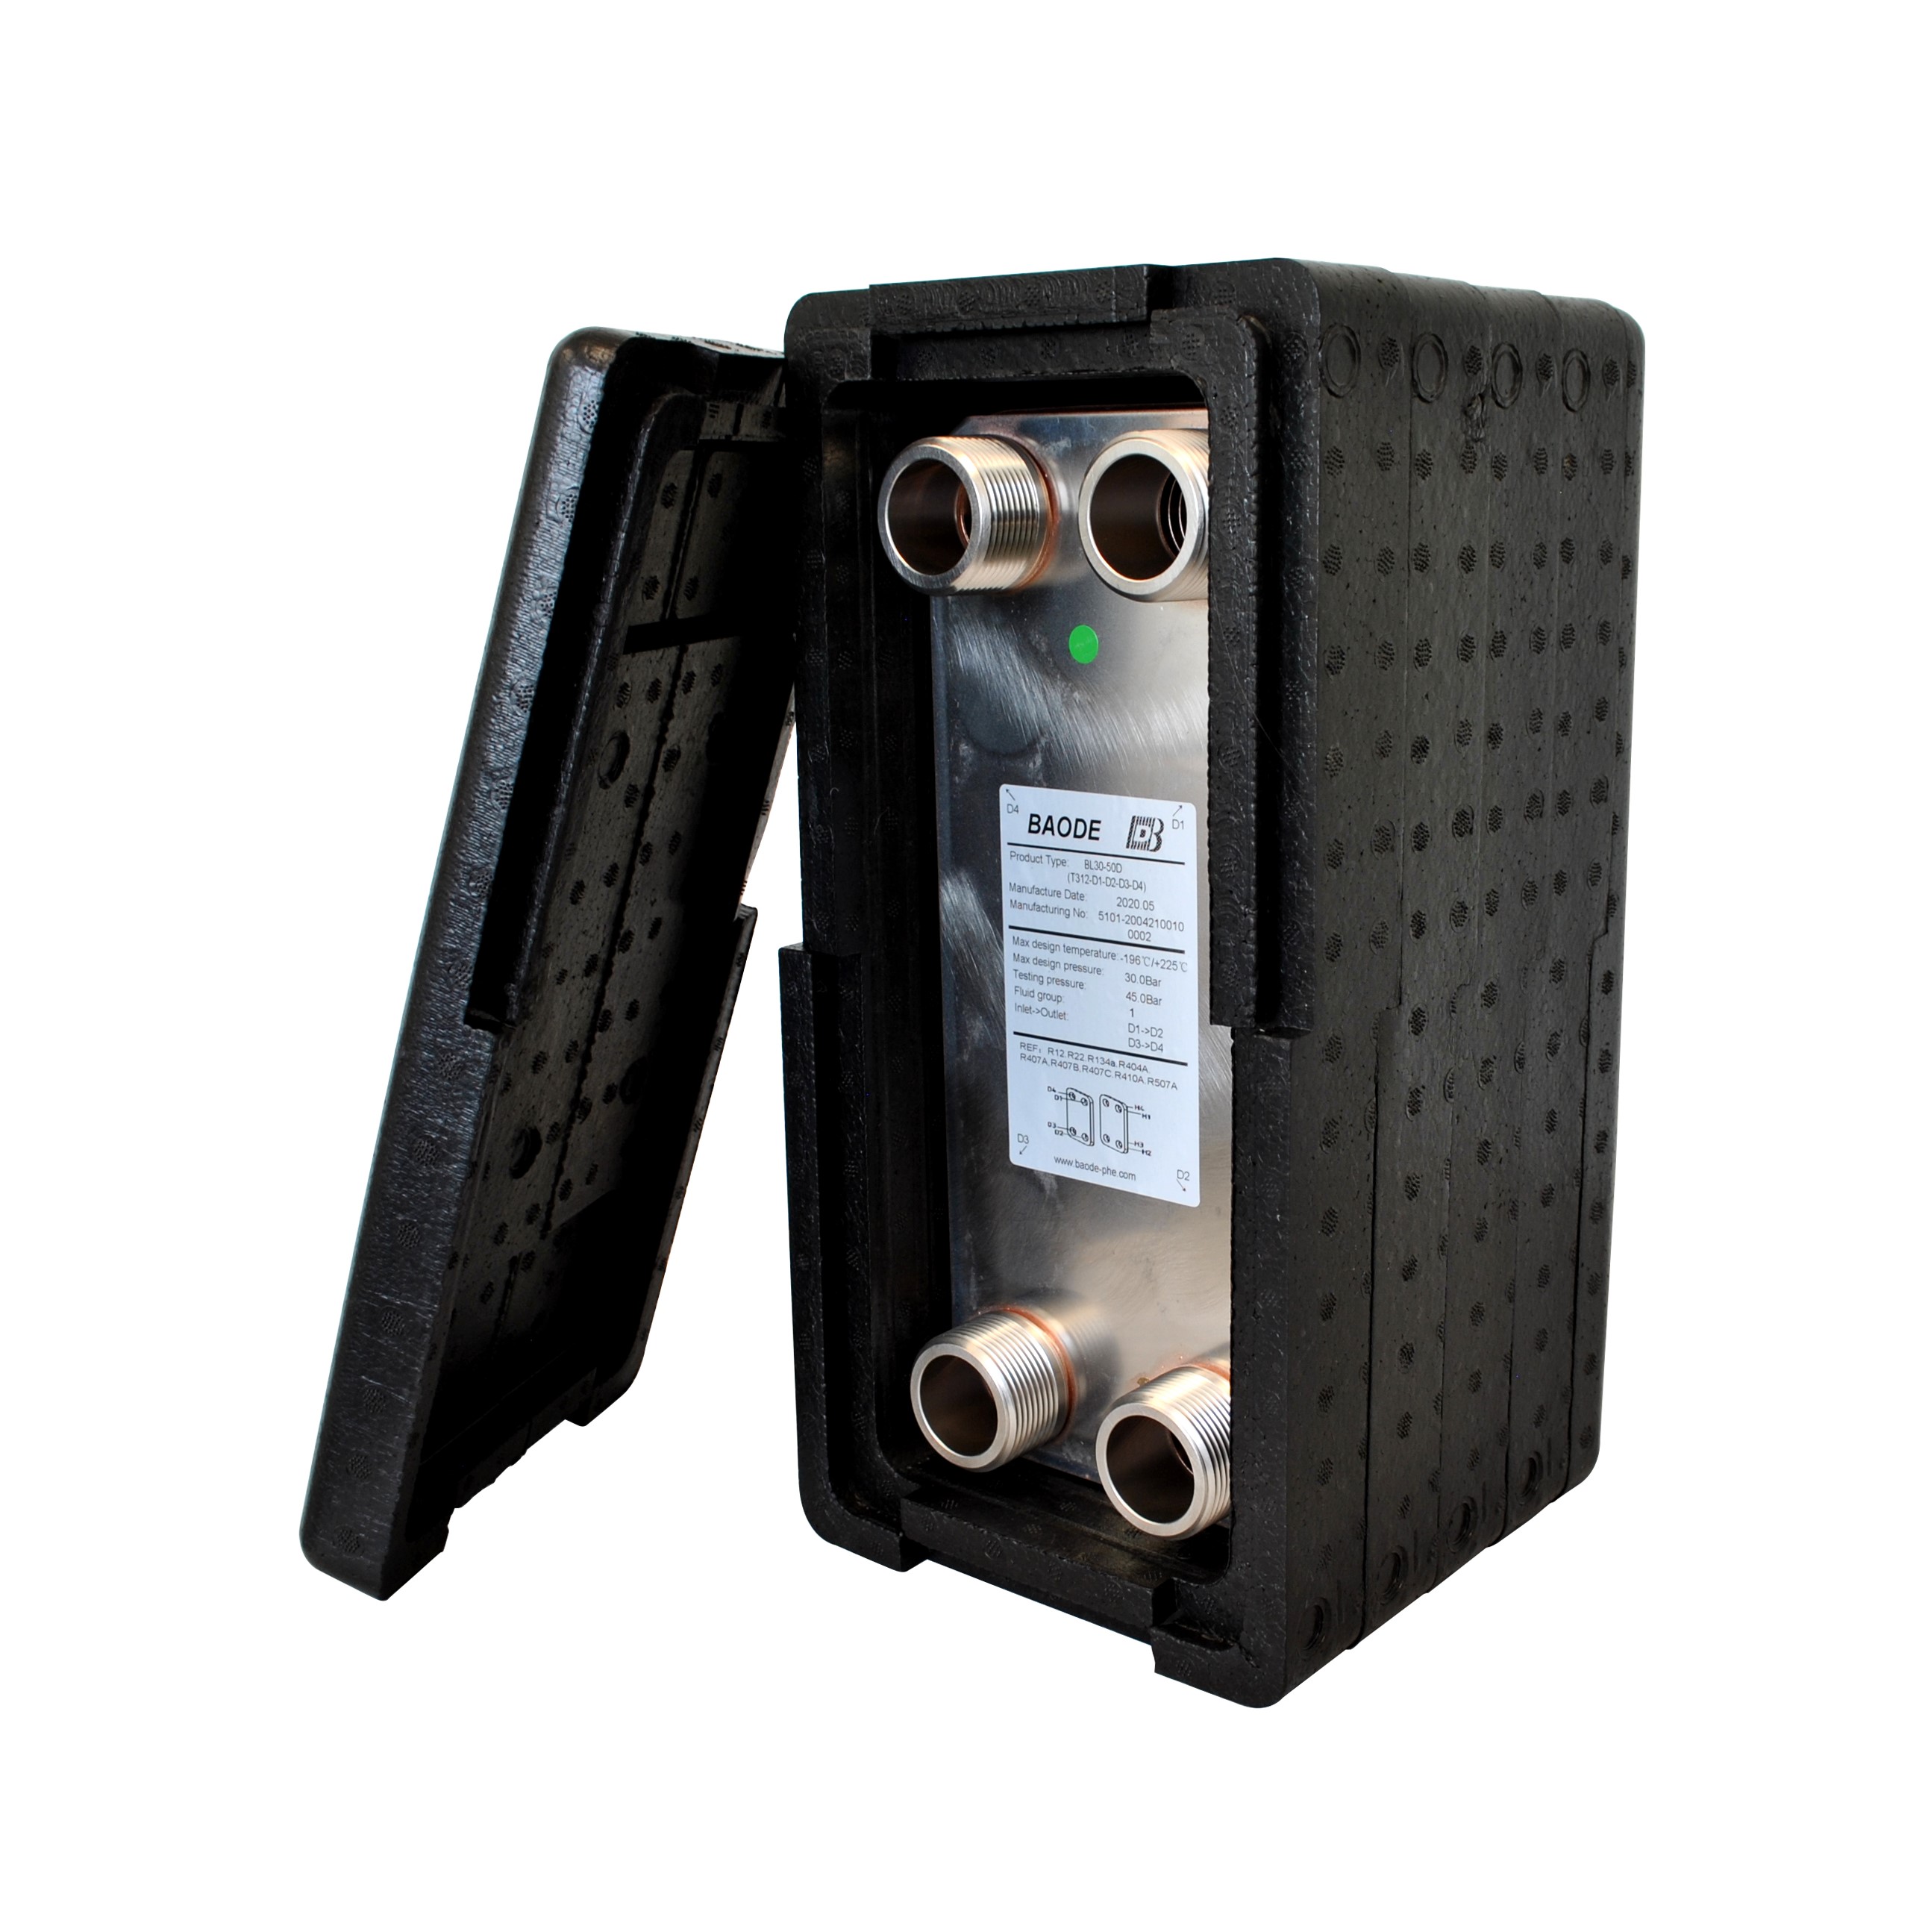 Baode BL26C-50 plate heat exchanger with insulation